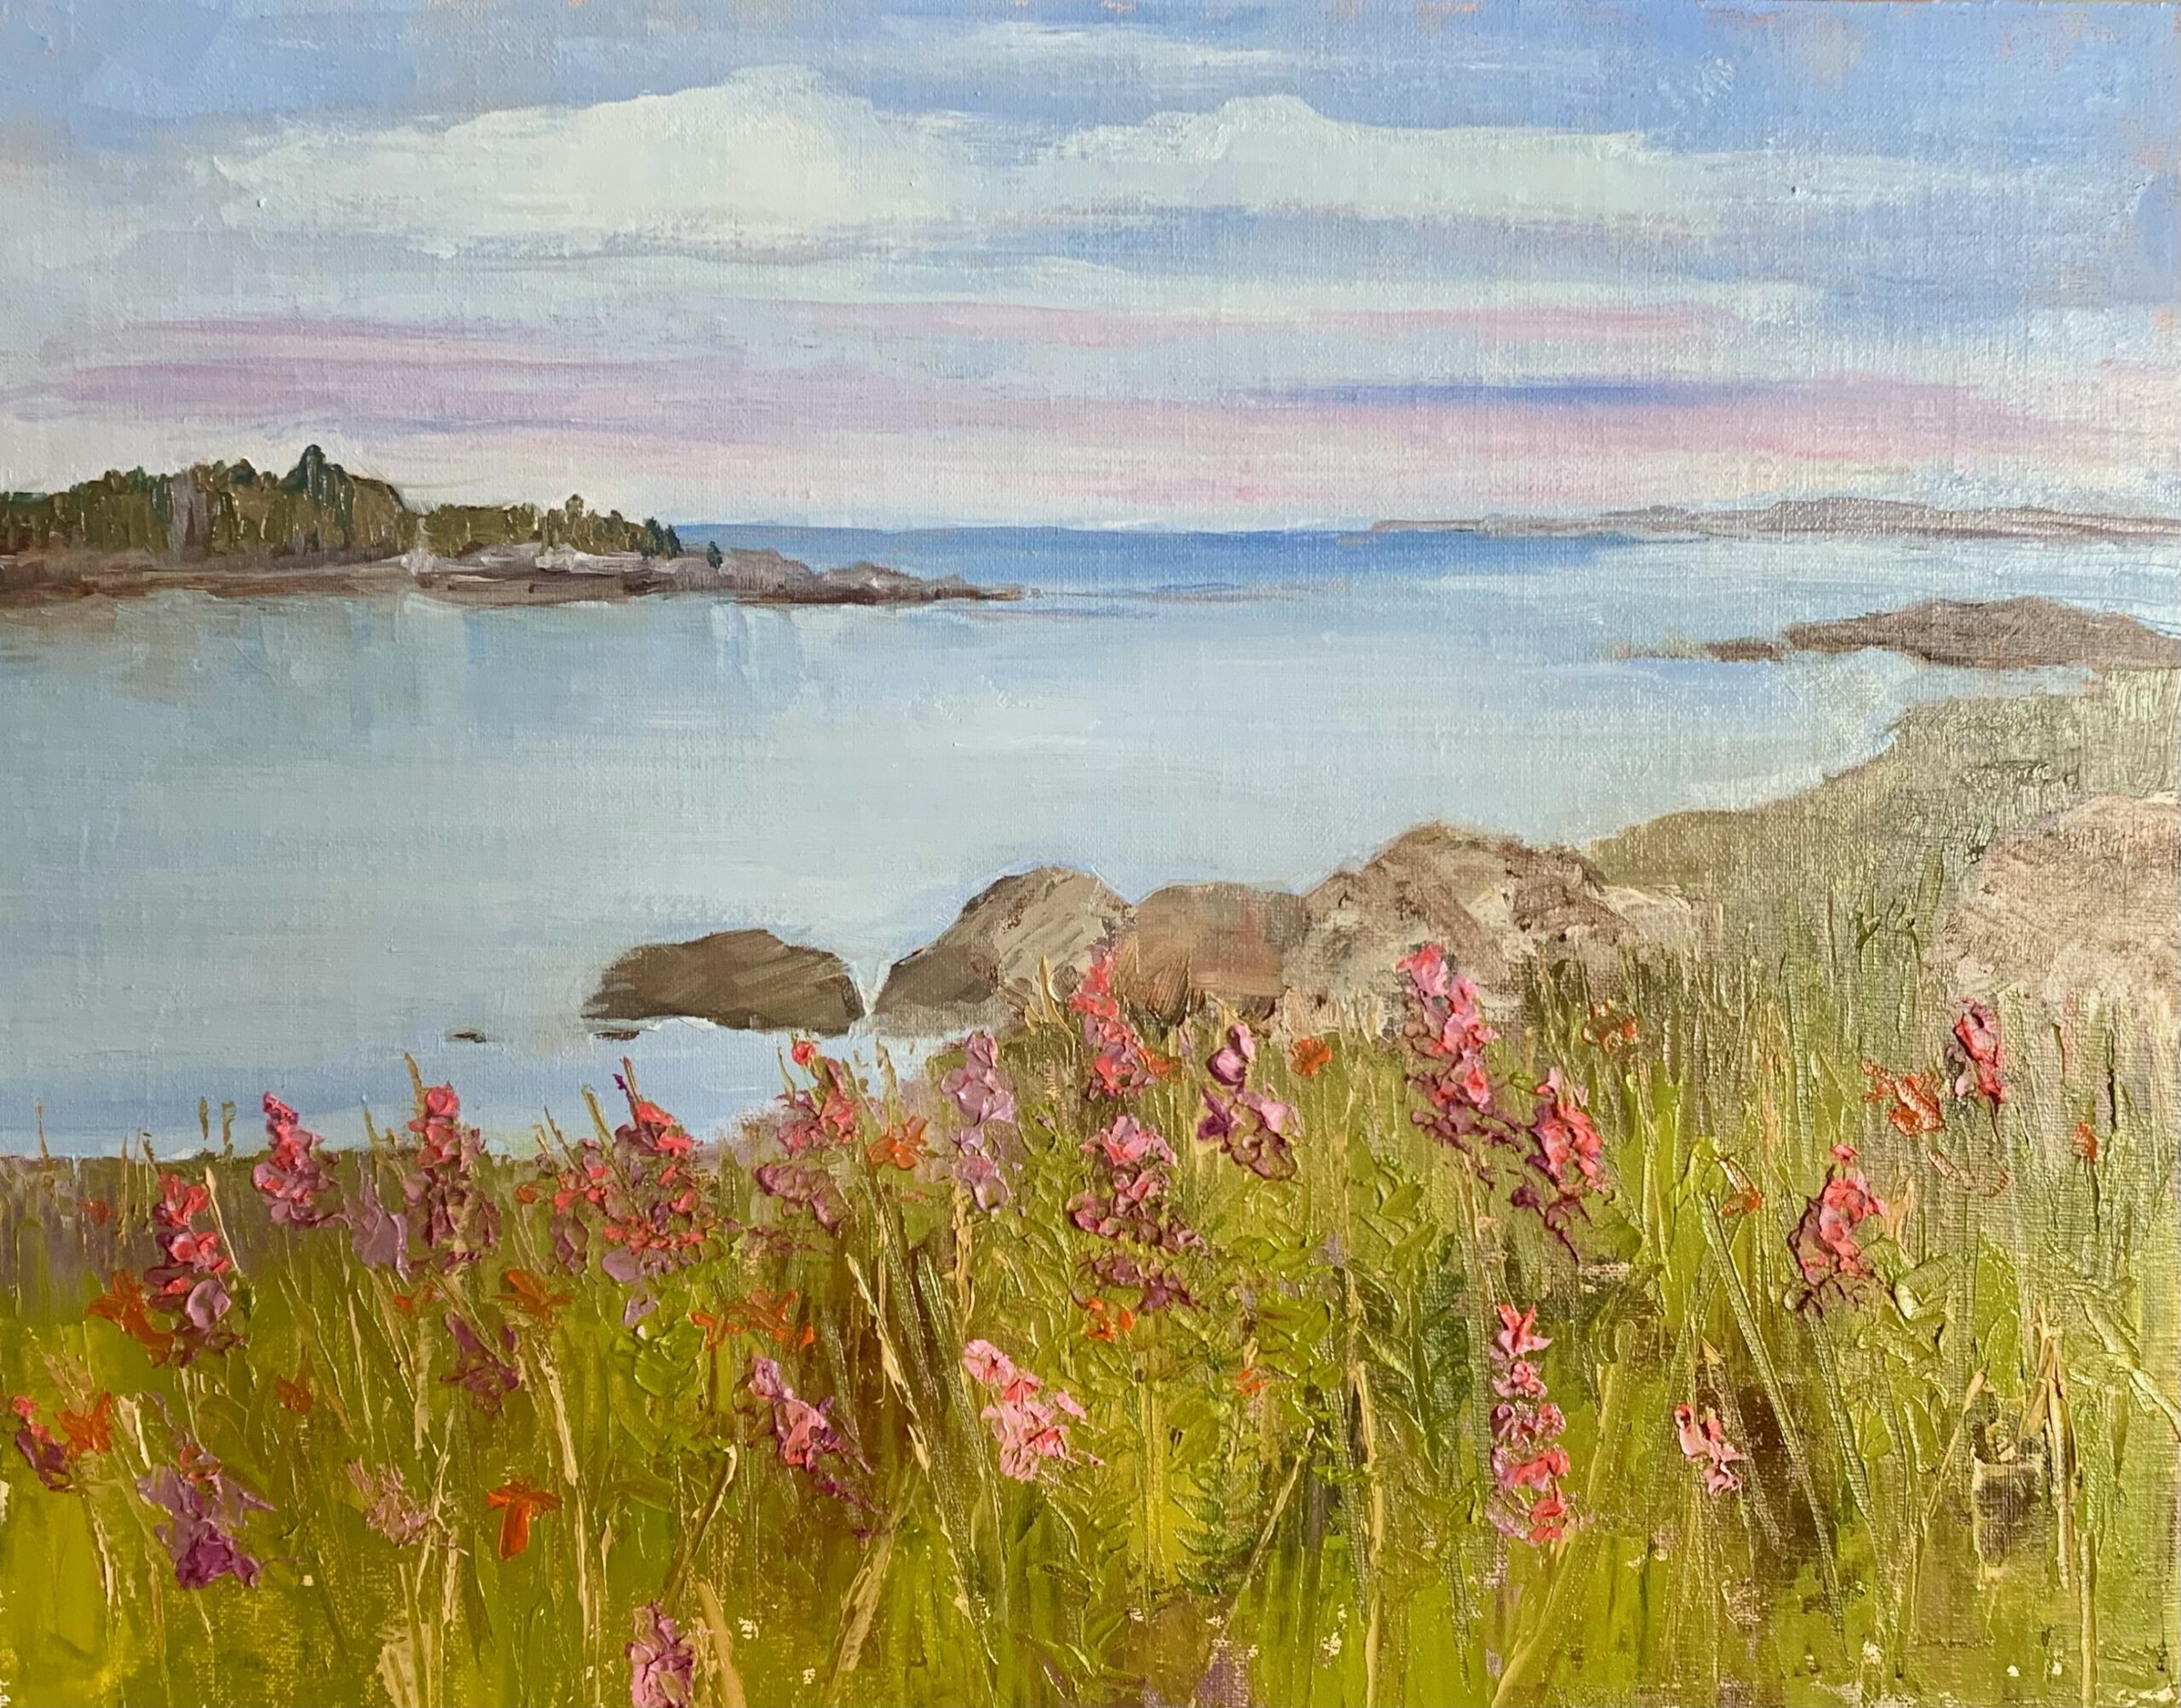 Blooming Sally by the Sea, 11x14, oil on canvasboard, $225, Patty Mabie. The artist has designated 100% of this sale to go to the library fund.